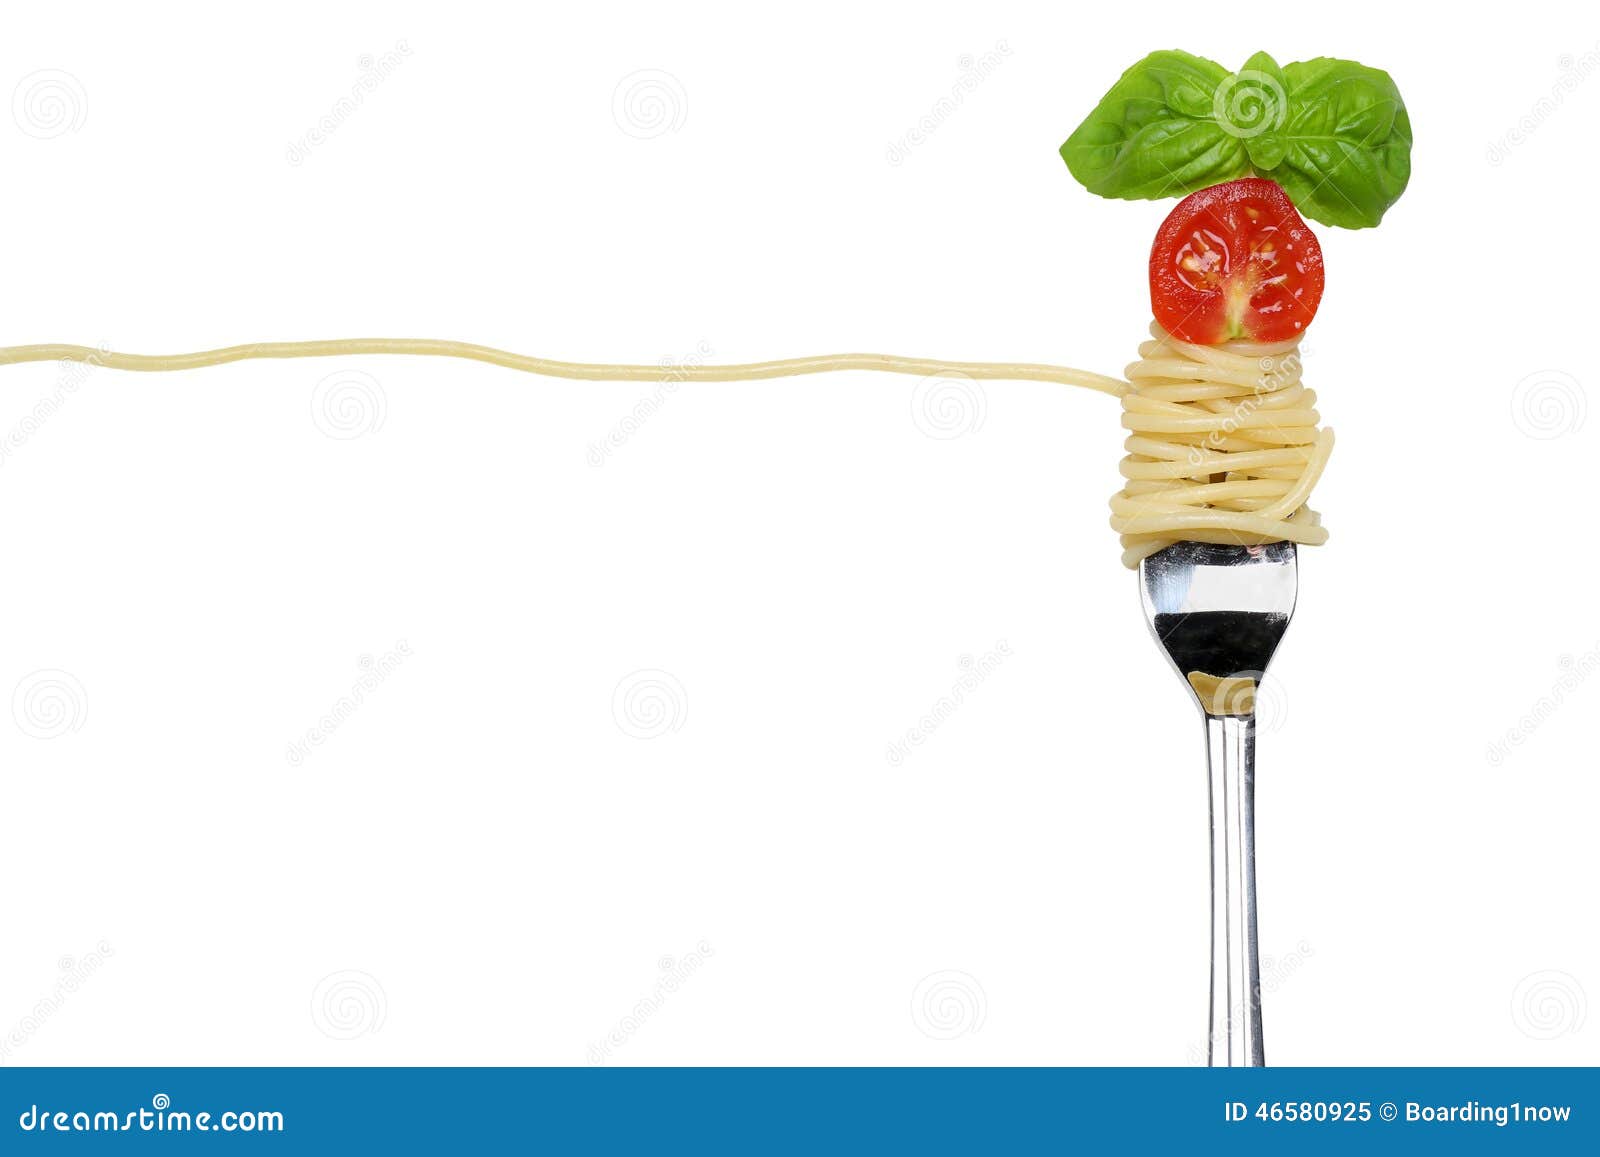 spaghetti noodles pasta meal on a fork 